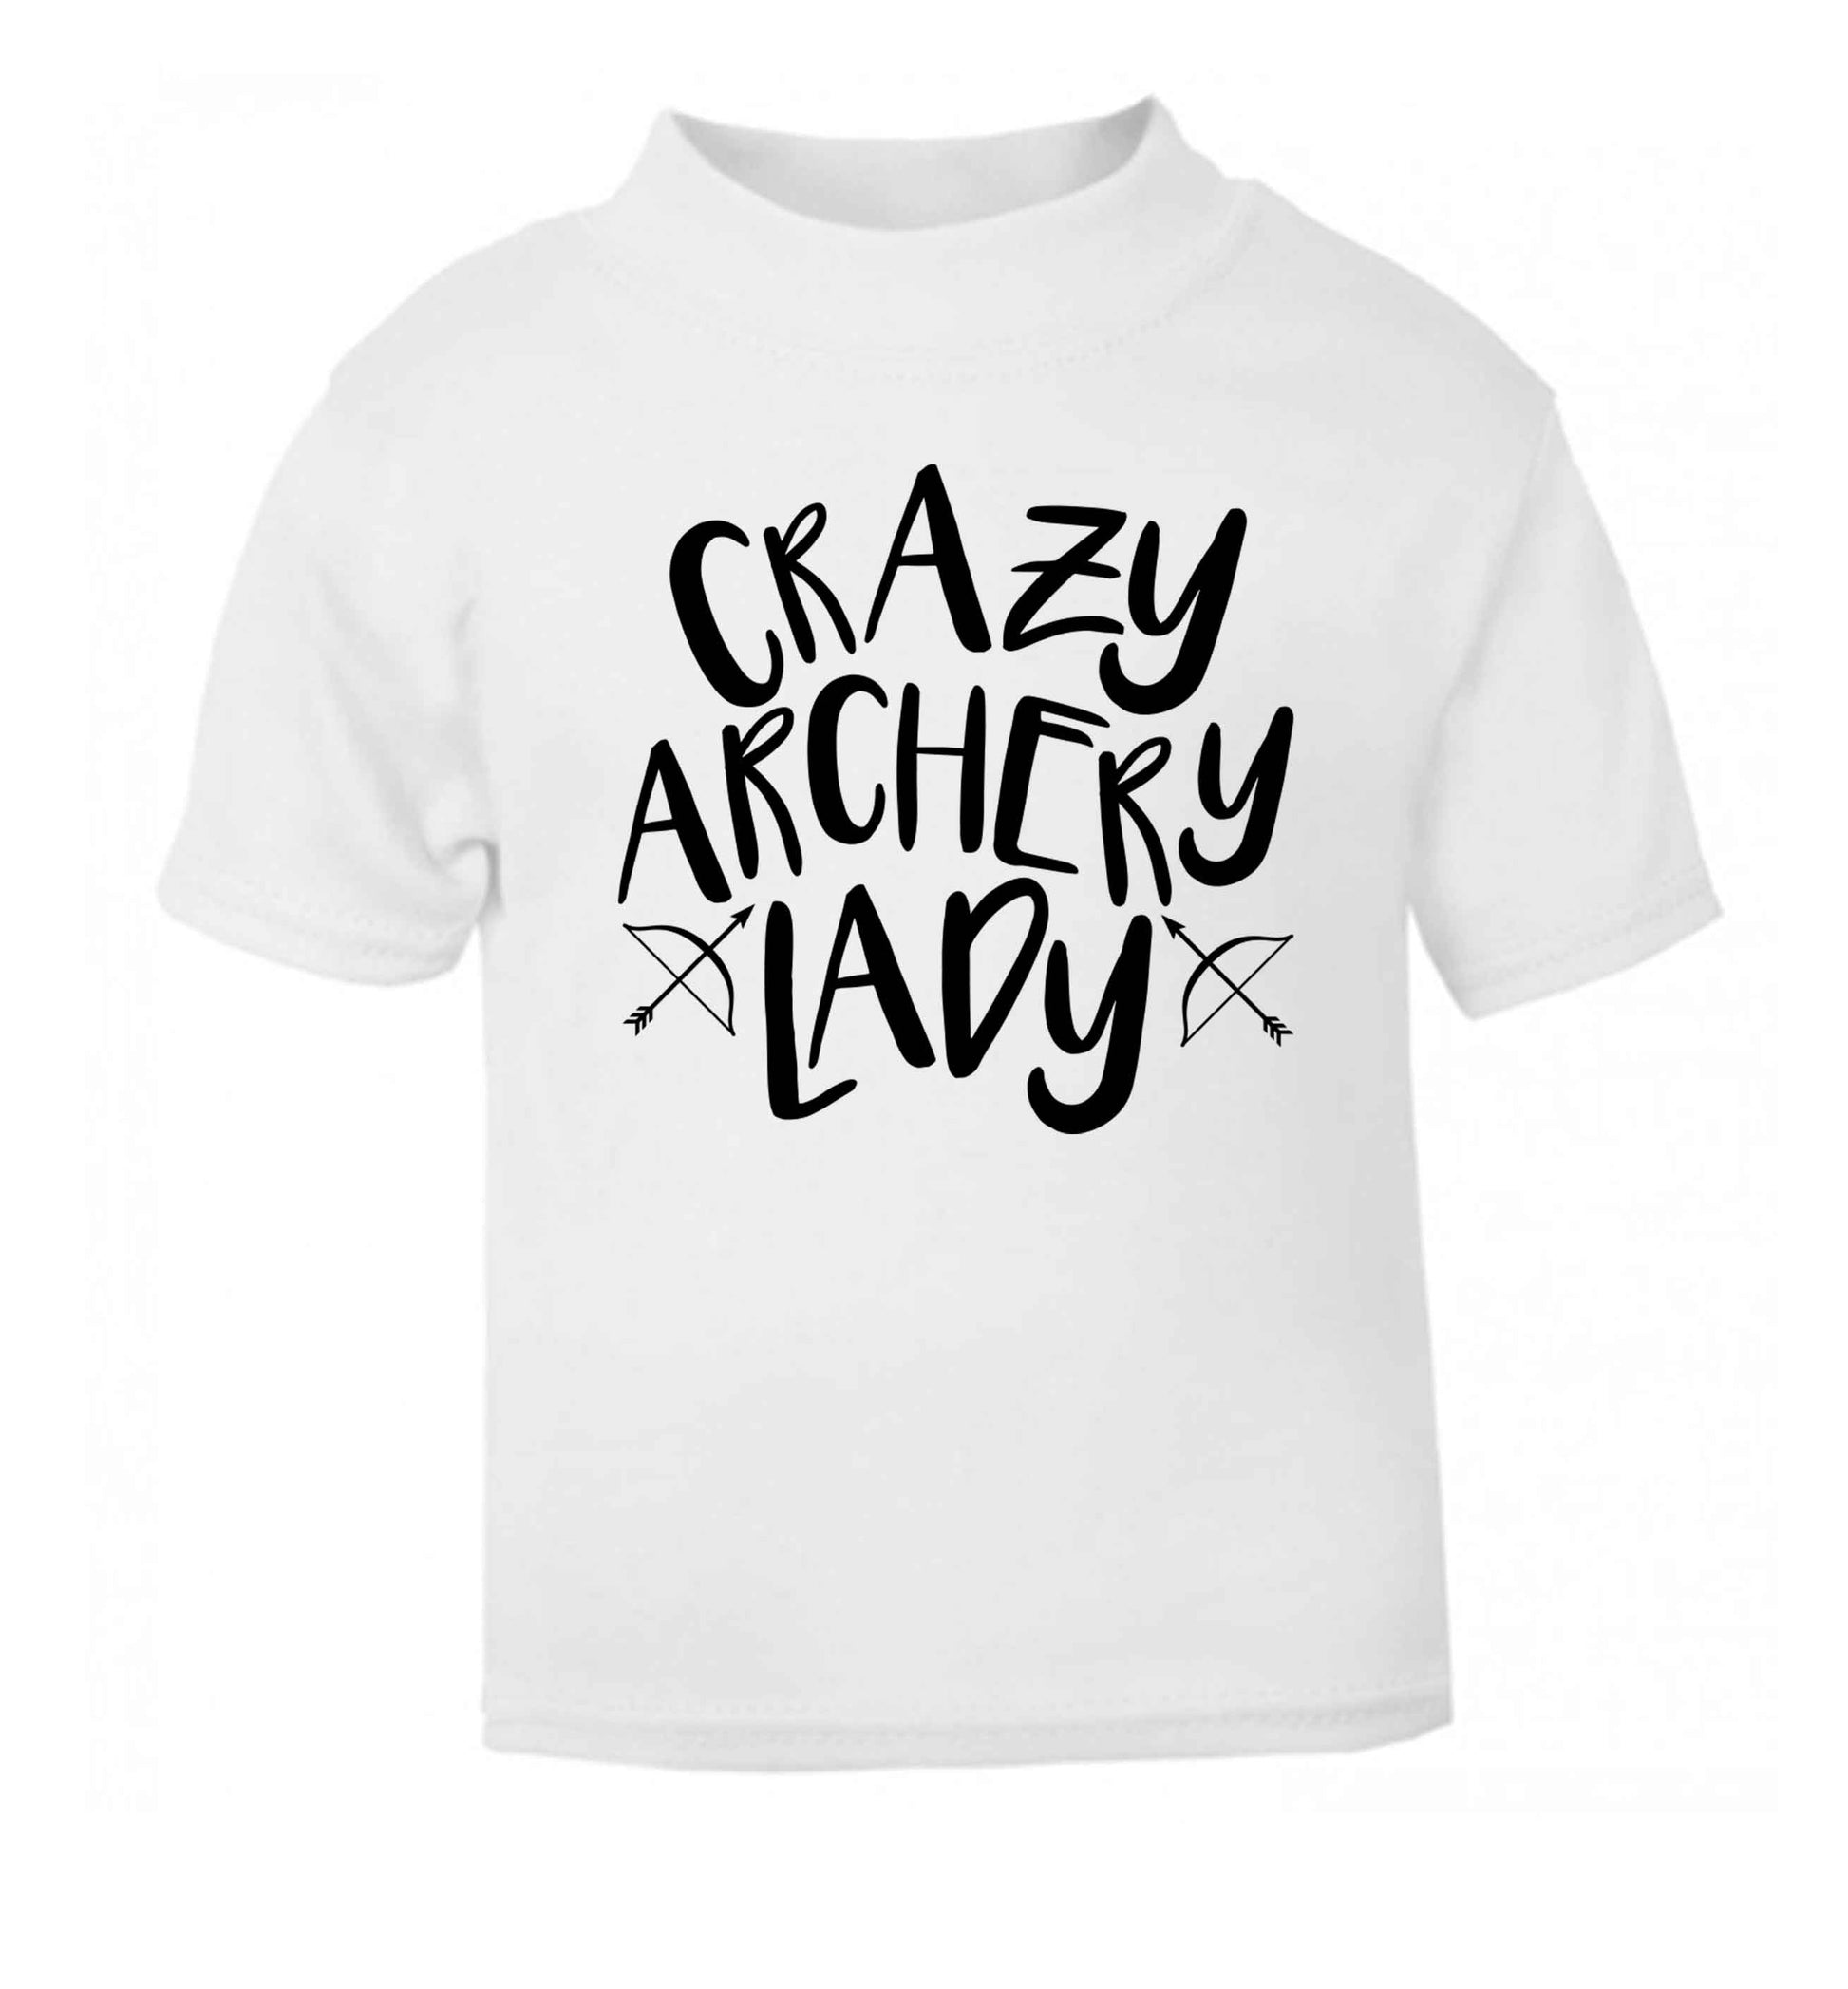 Crazy archery lady white Baby Toddler Tshirt 2 Years